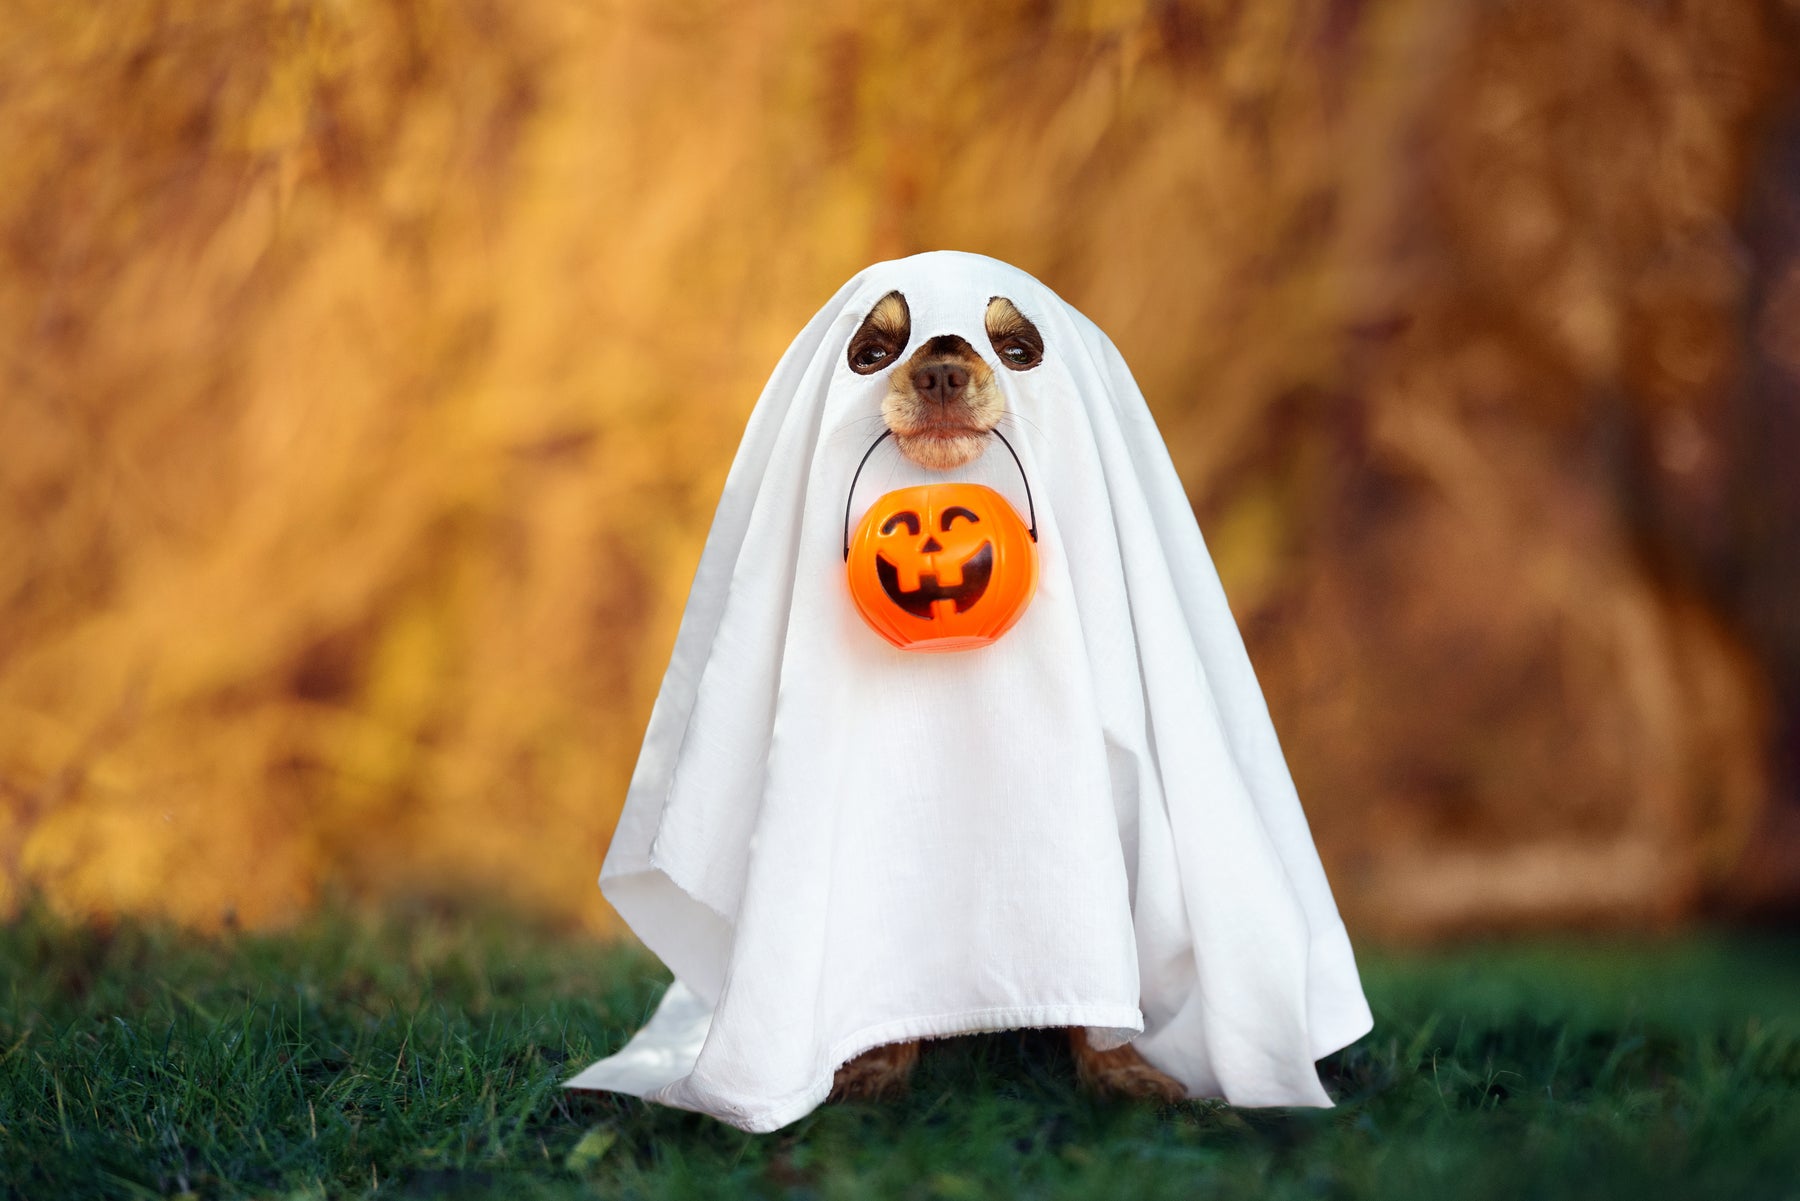 Keeping your pets safe at Halloween